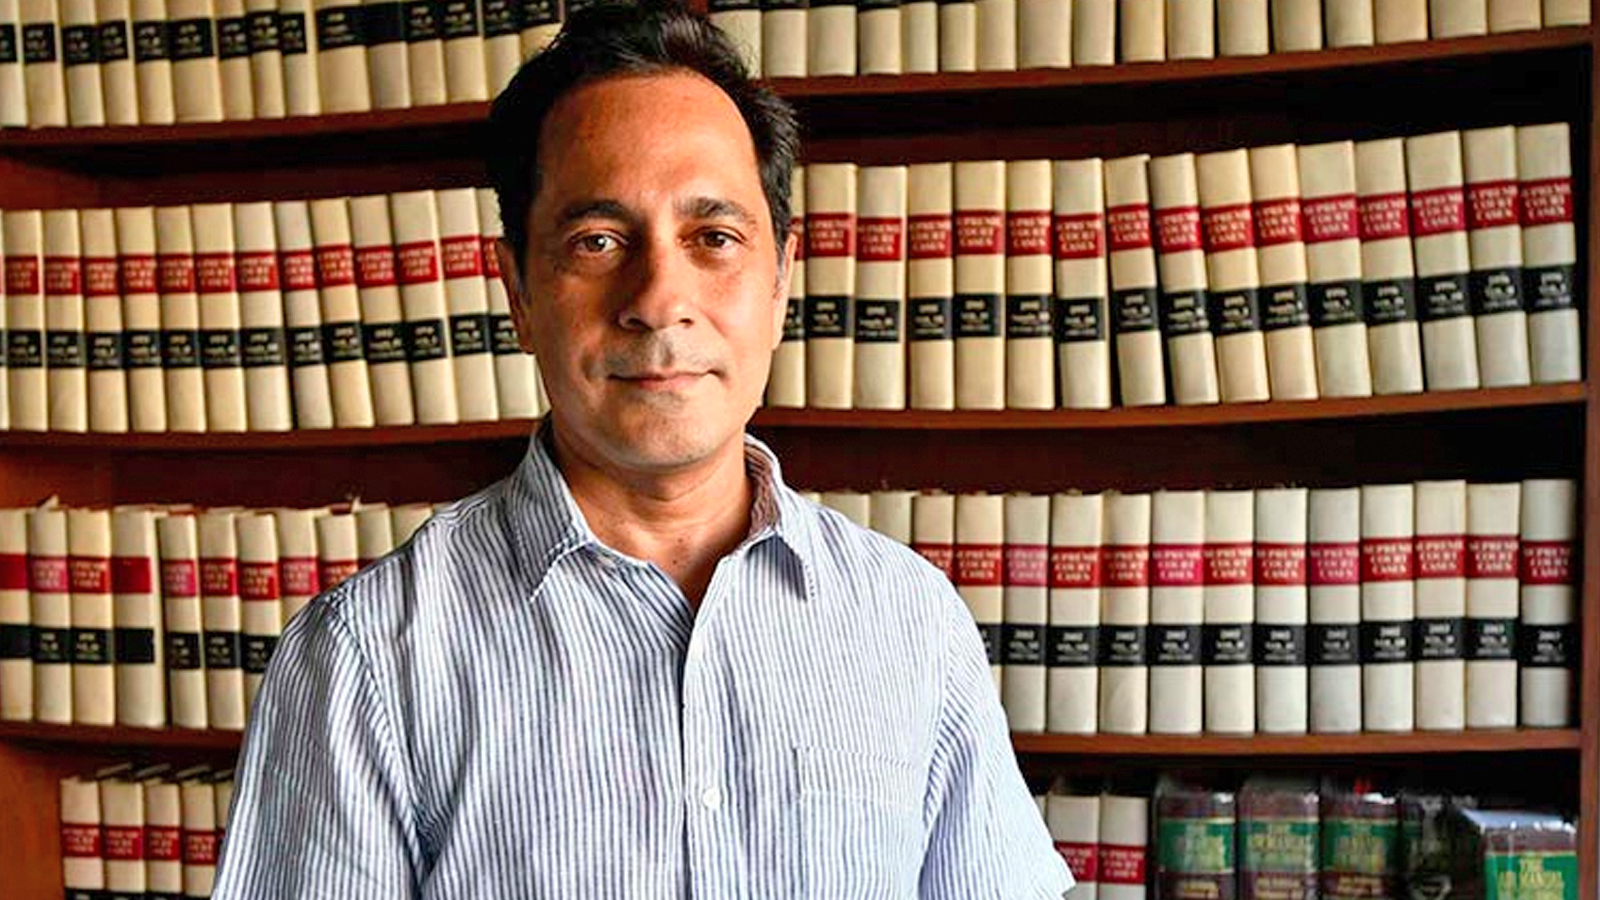 India dispatch: Supreme Court and Centre continue at odds over Kirpal appointment to top court